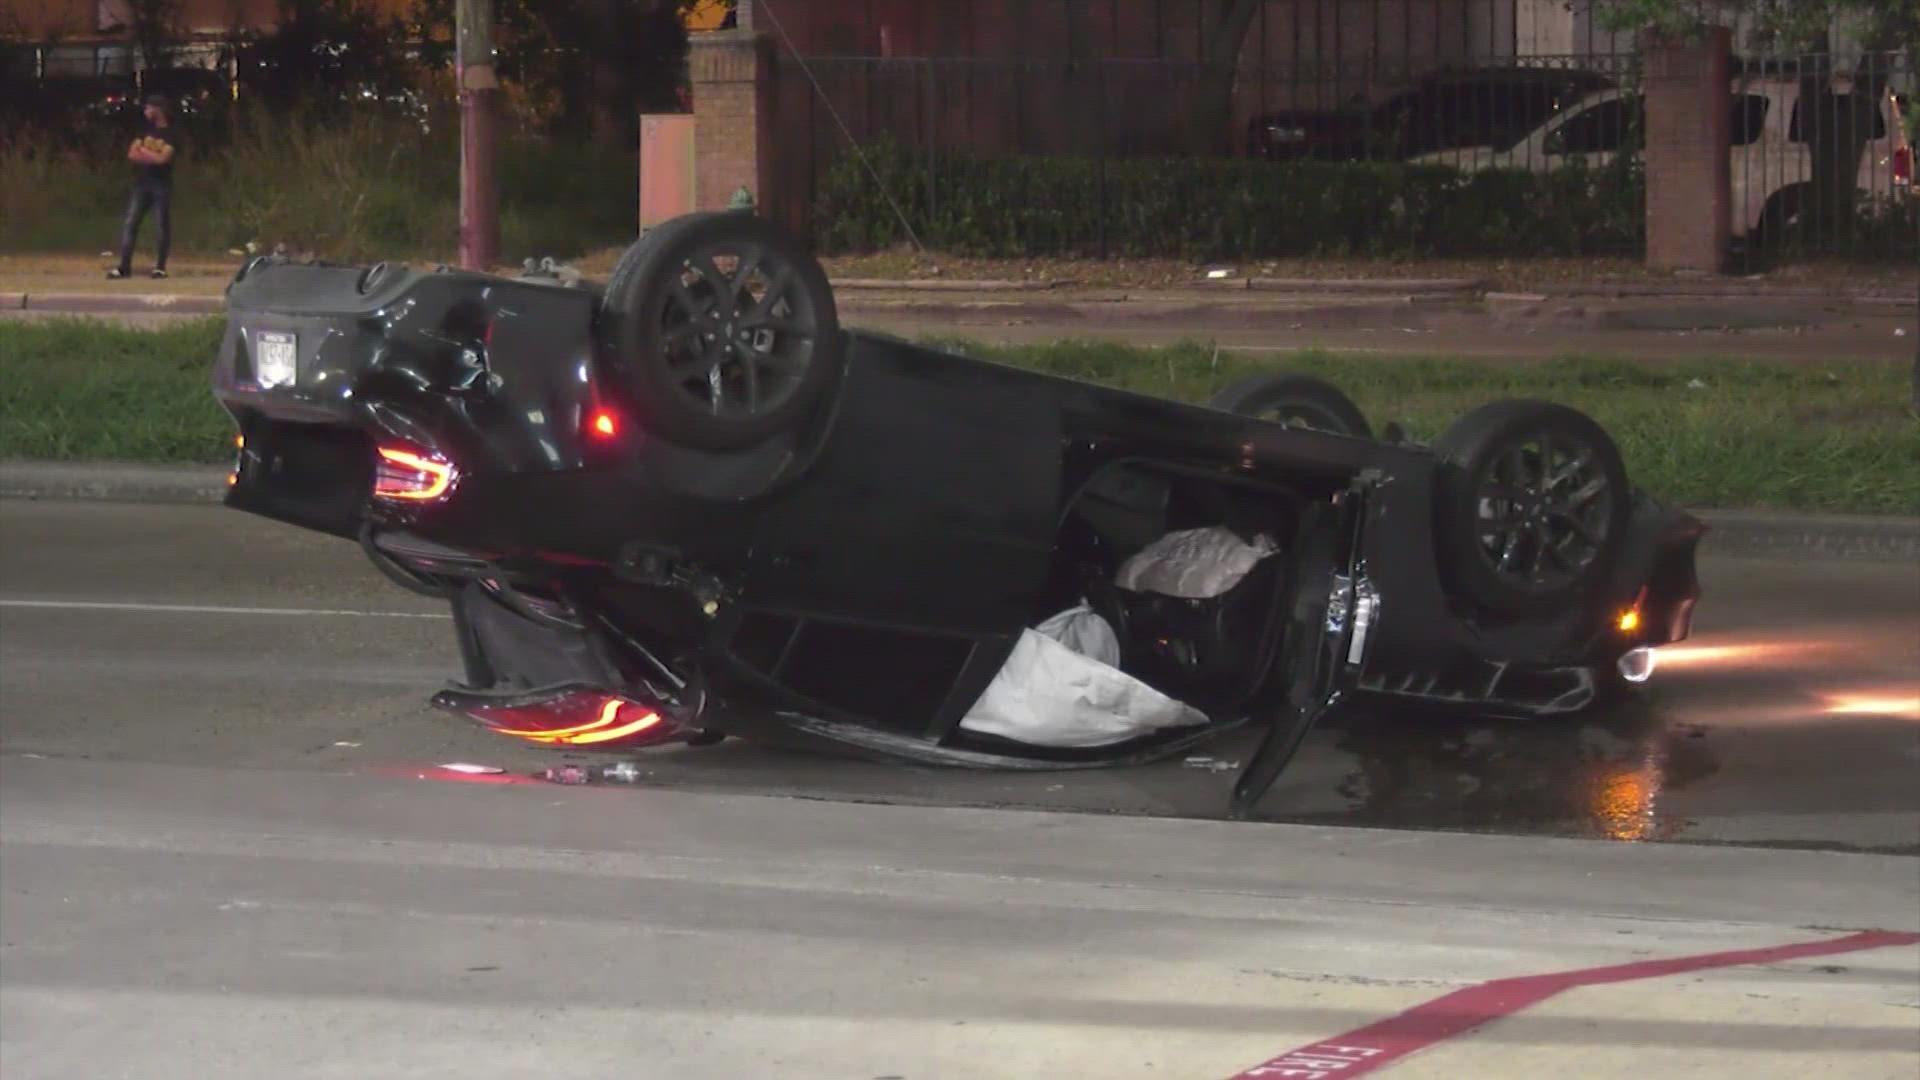 Police said the car struck a light pole before flipping and hitting a woman that was walking across the road.